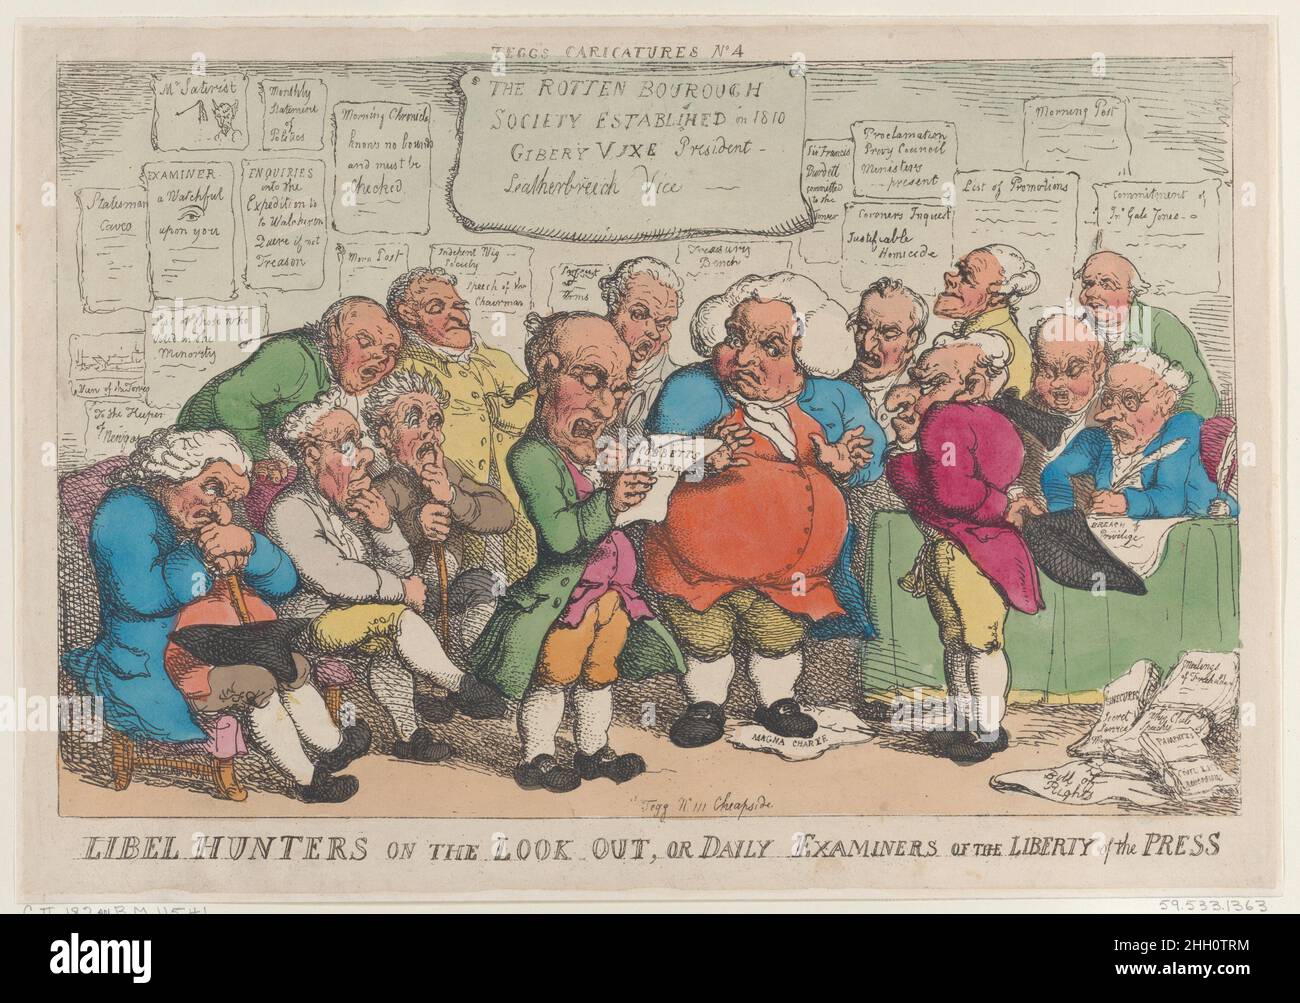 Libel Hunters on the Lookout, or Daily Examiners of the Liberty Press April 12, 1810 Thomas Rowlandson Fourteen elderly men discuss libel proceedings. A large placard on the wall shows that they are members of 'The Rotten Bourough Society Established in 1810 Gibery Vixe President Leatherbreech Vice—'. Libel Hunters on the Lookout, or Daily Examiners of the Liberty Press. Thomas Rowlandson (British, London 1757–1827 London). April 12, 1810. Hand-colored etching. Thomas Tegg (British, 1776–1846). Prints Stock Photo